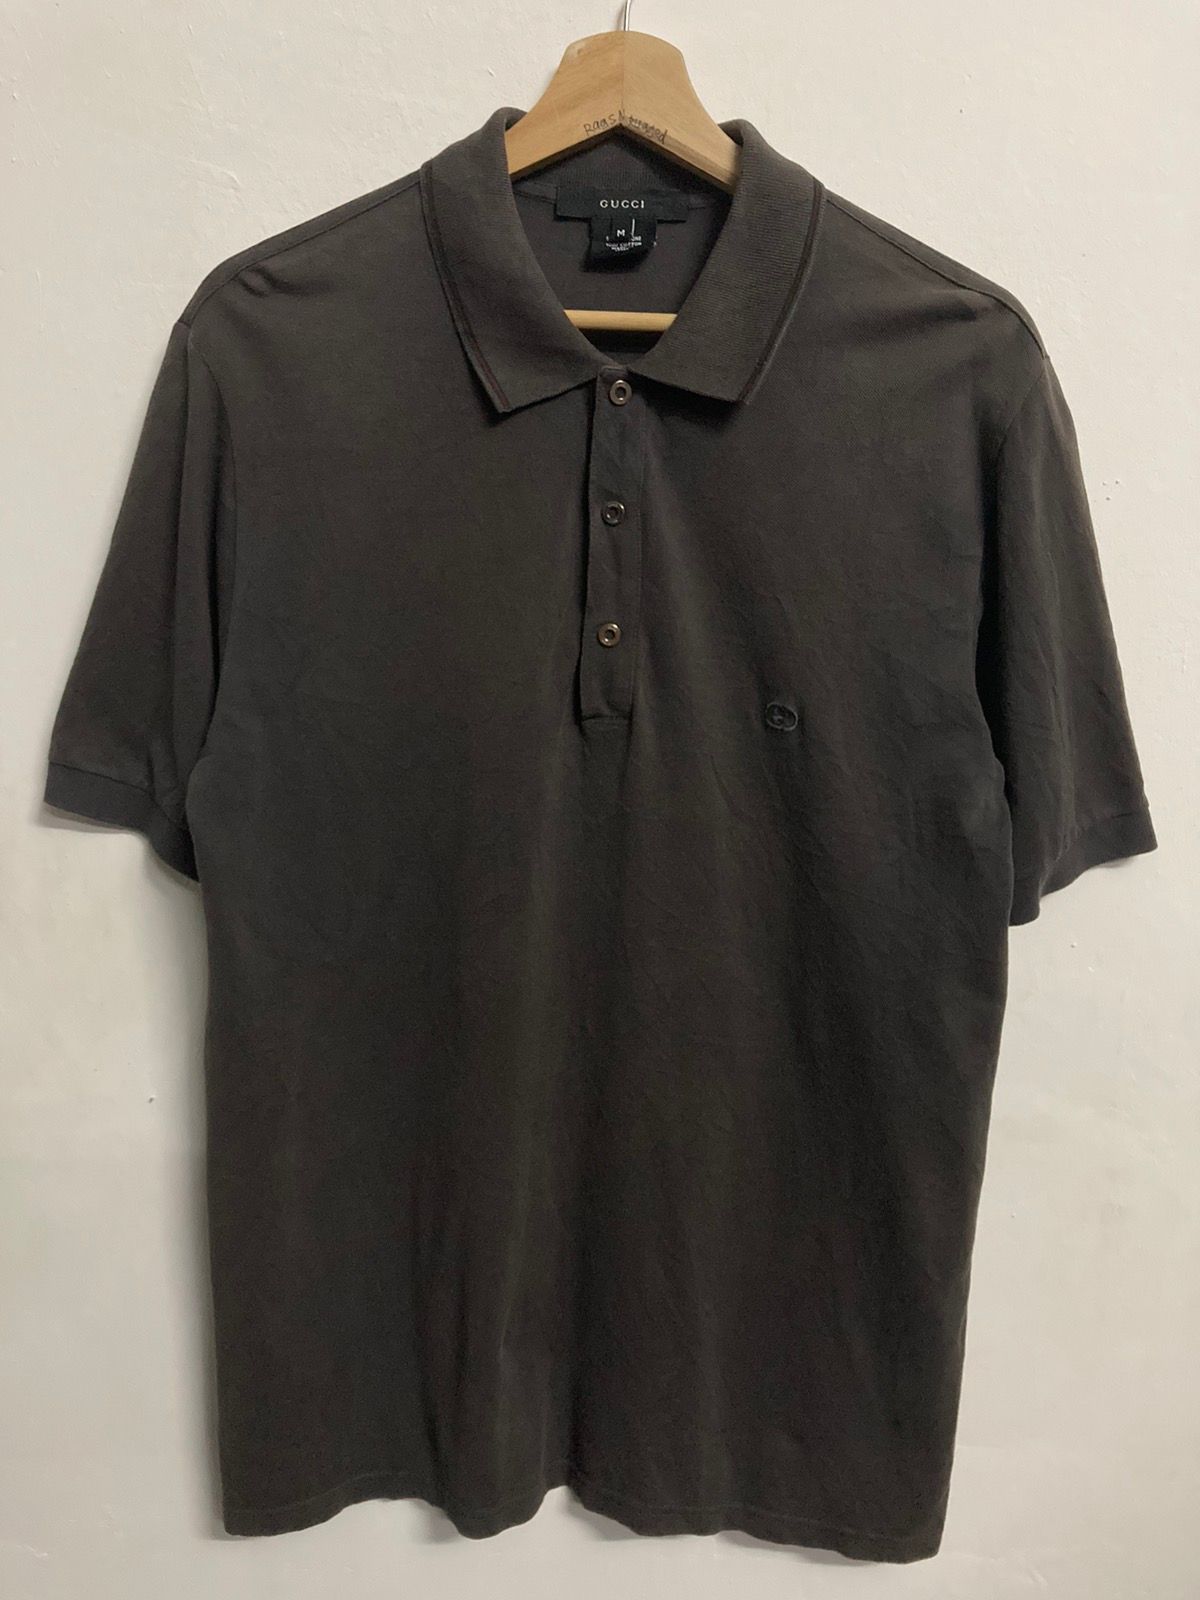 Authentic Gucci Polo T-shirt - 1